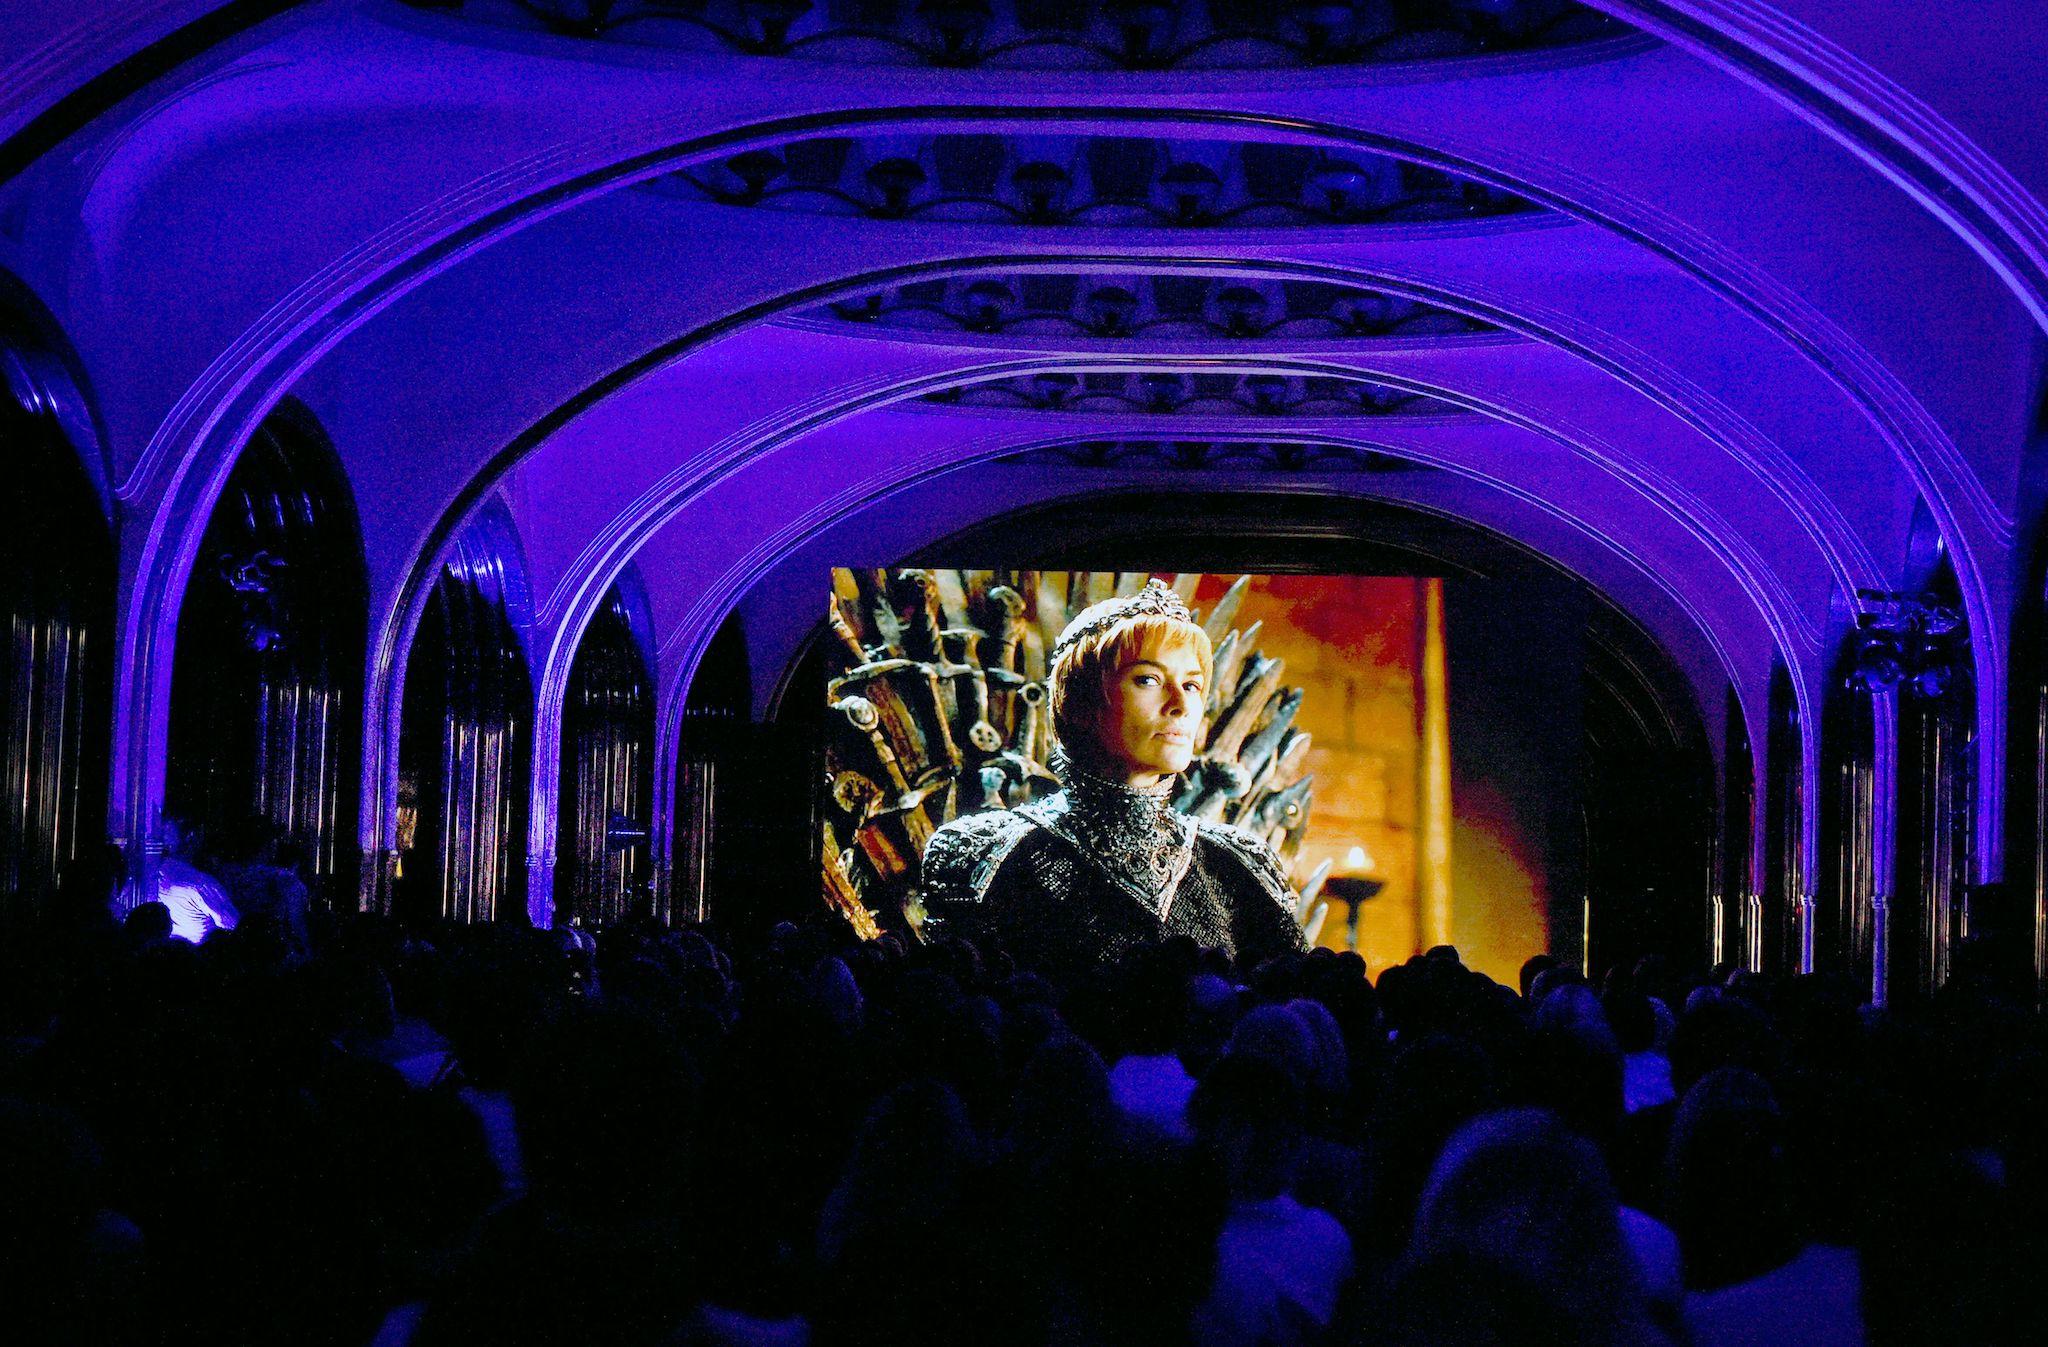 People watch the seventh season premiere of US TV show "Game of Thrones" at the Mayakovskaya metro station in Moscow early on July 18, 2017